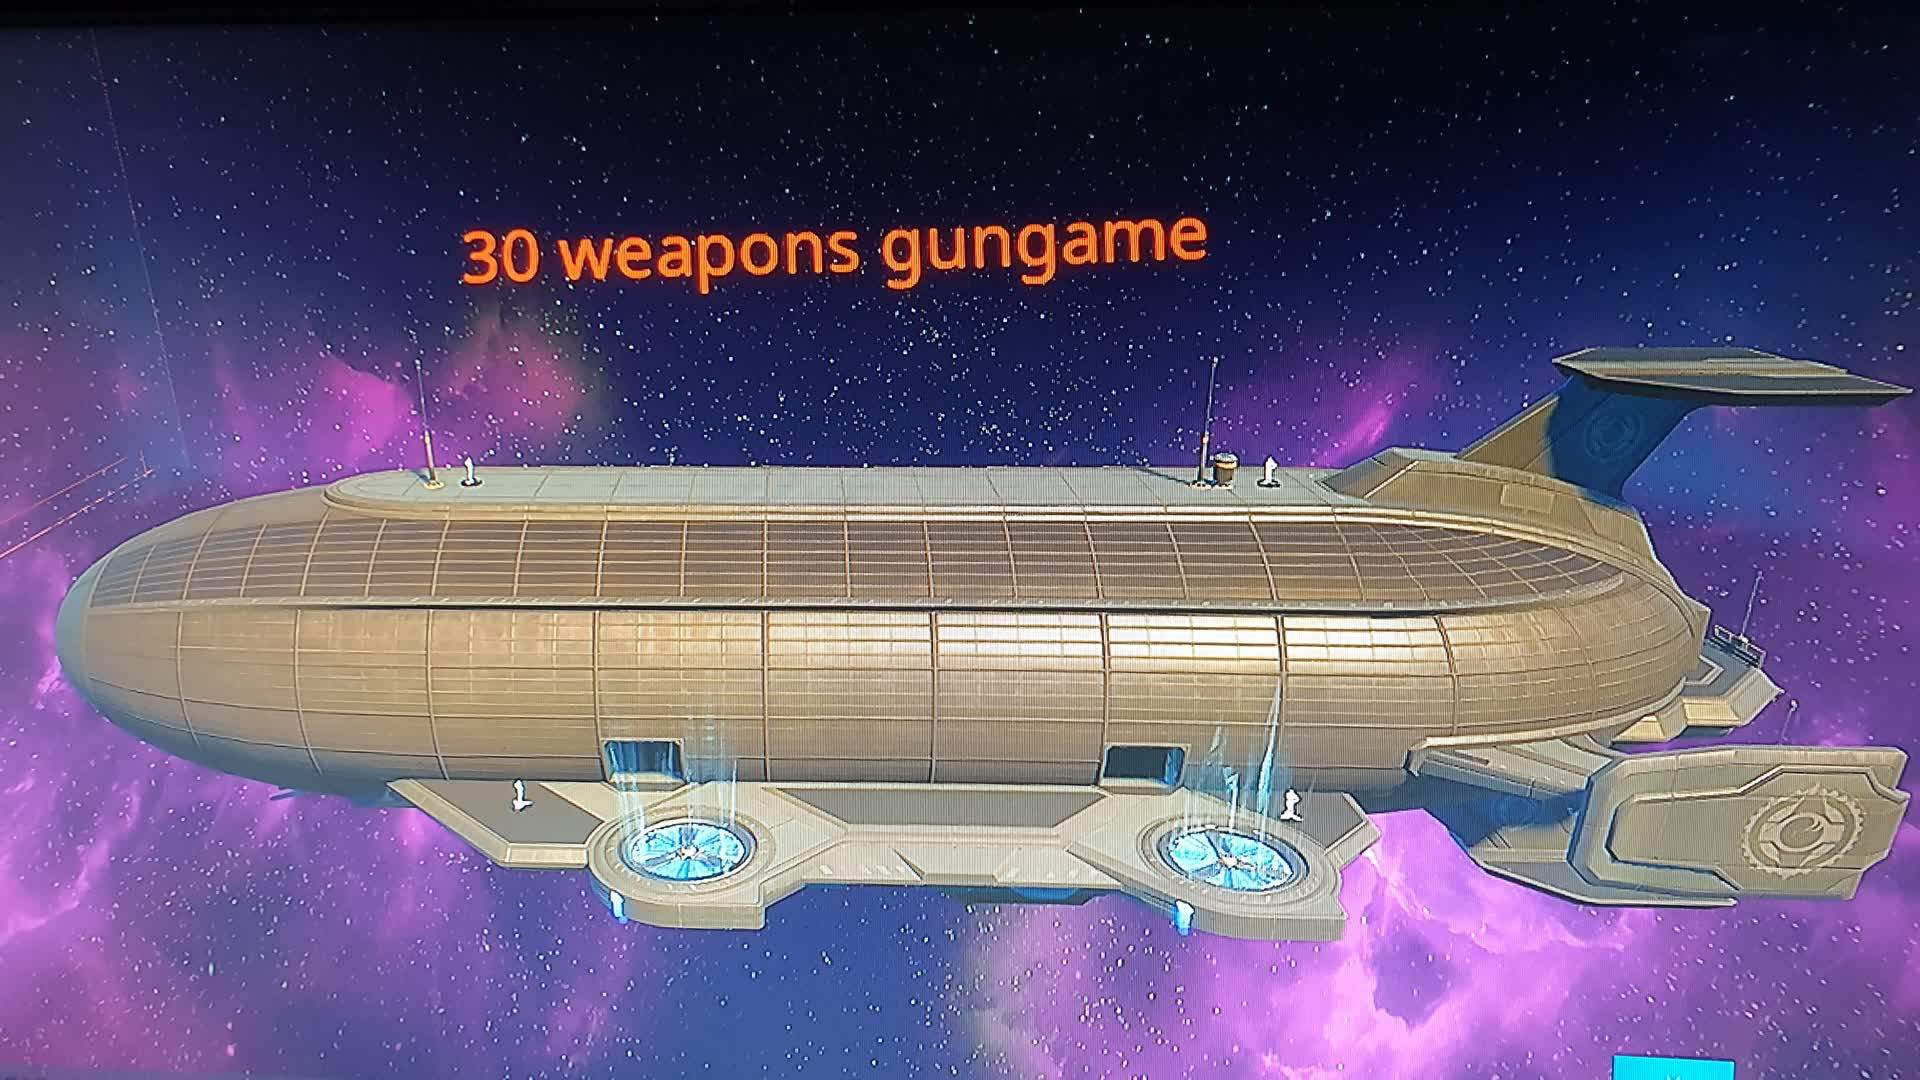 The Space Blimp Gungame